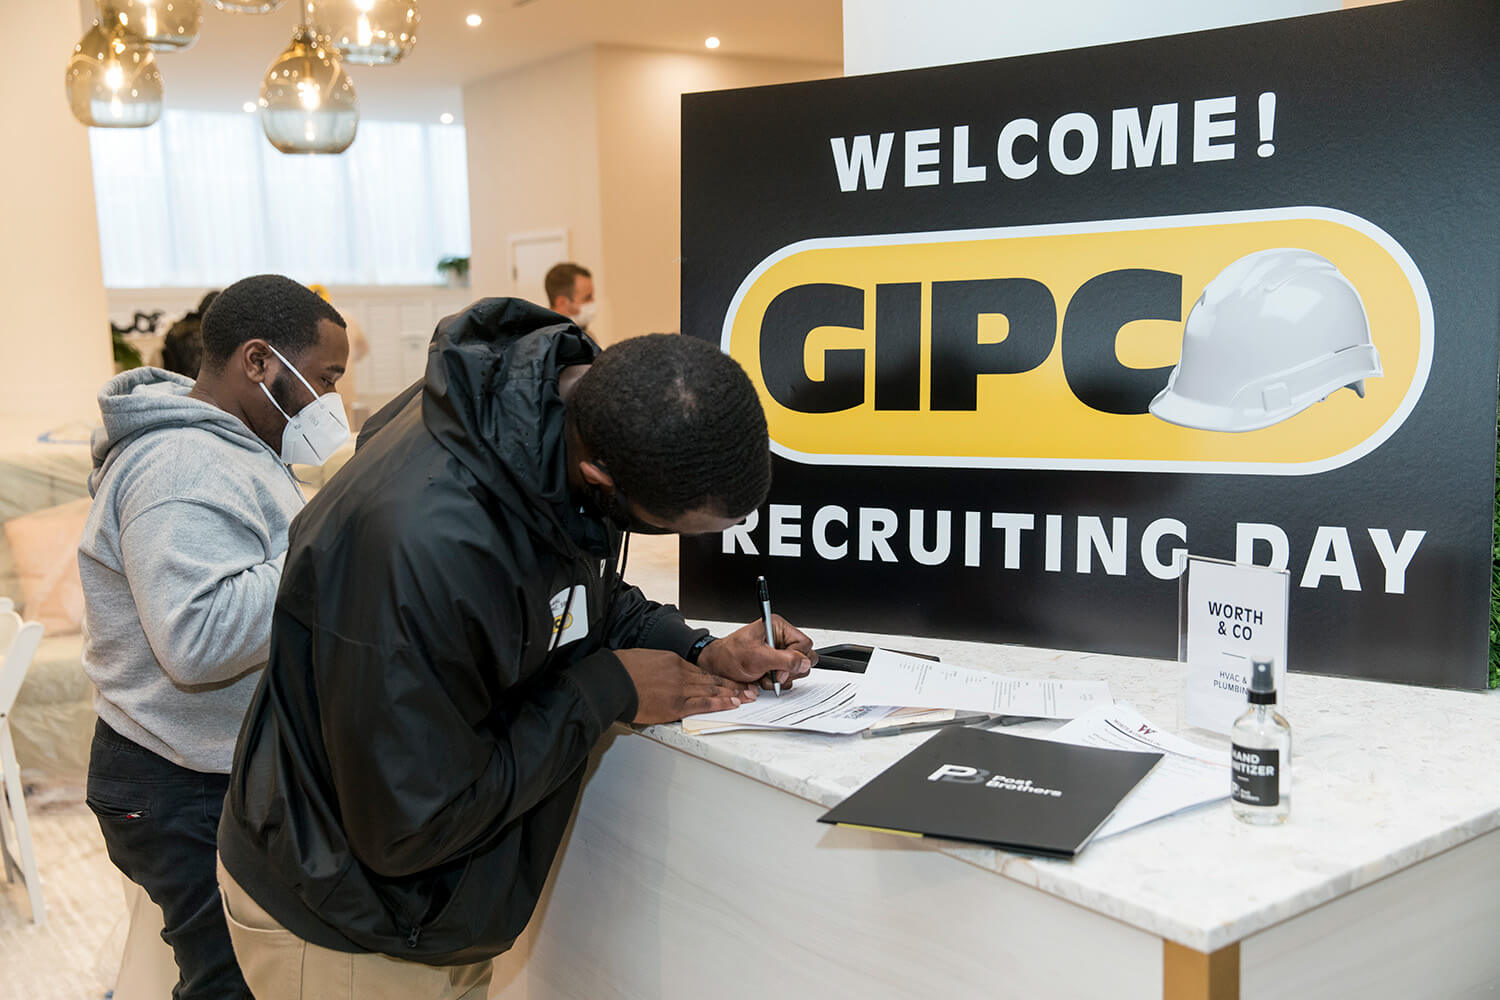 GIPC Recruiting Day People Signing Up